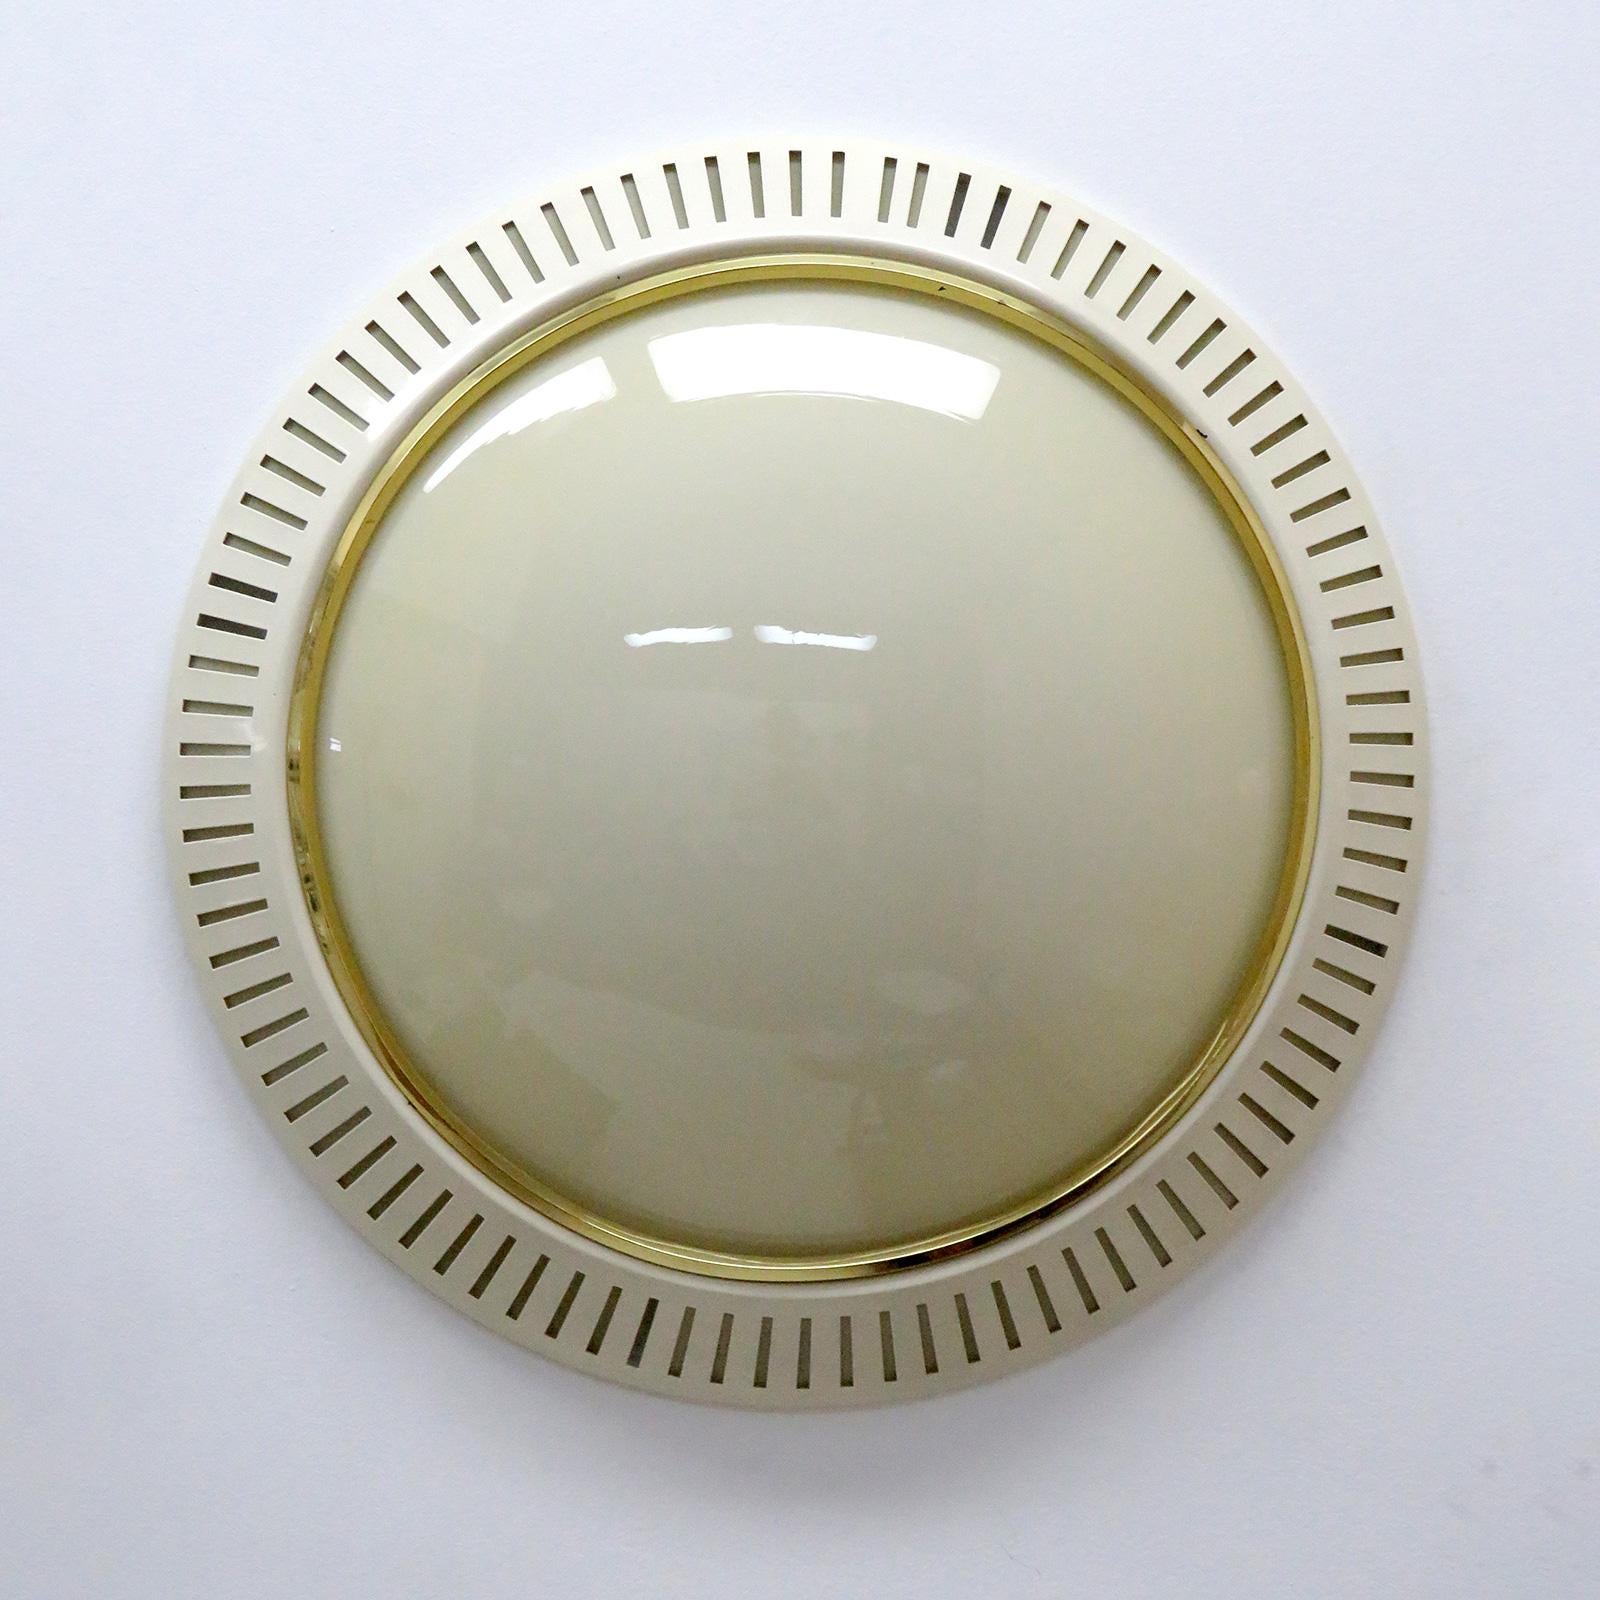 Wonderful large-scale flush mount with an beige colored glass diffuser held by a perforated eggshell colored metal enclosure with brass ring, can be used as wall or ceiling light.